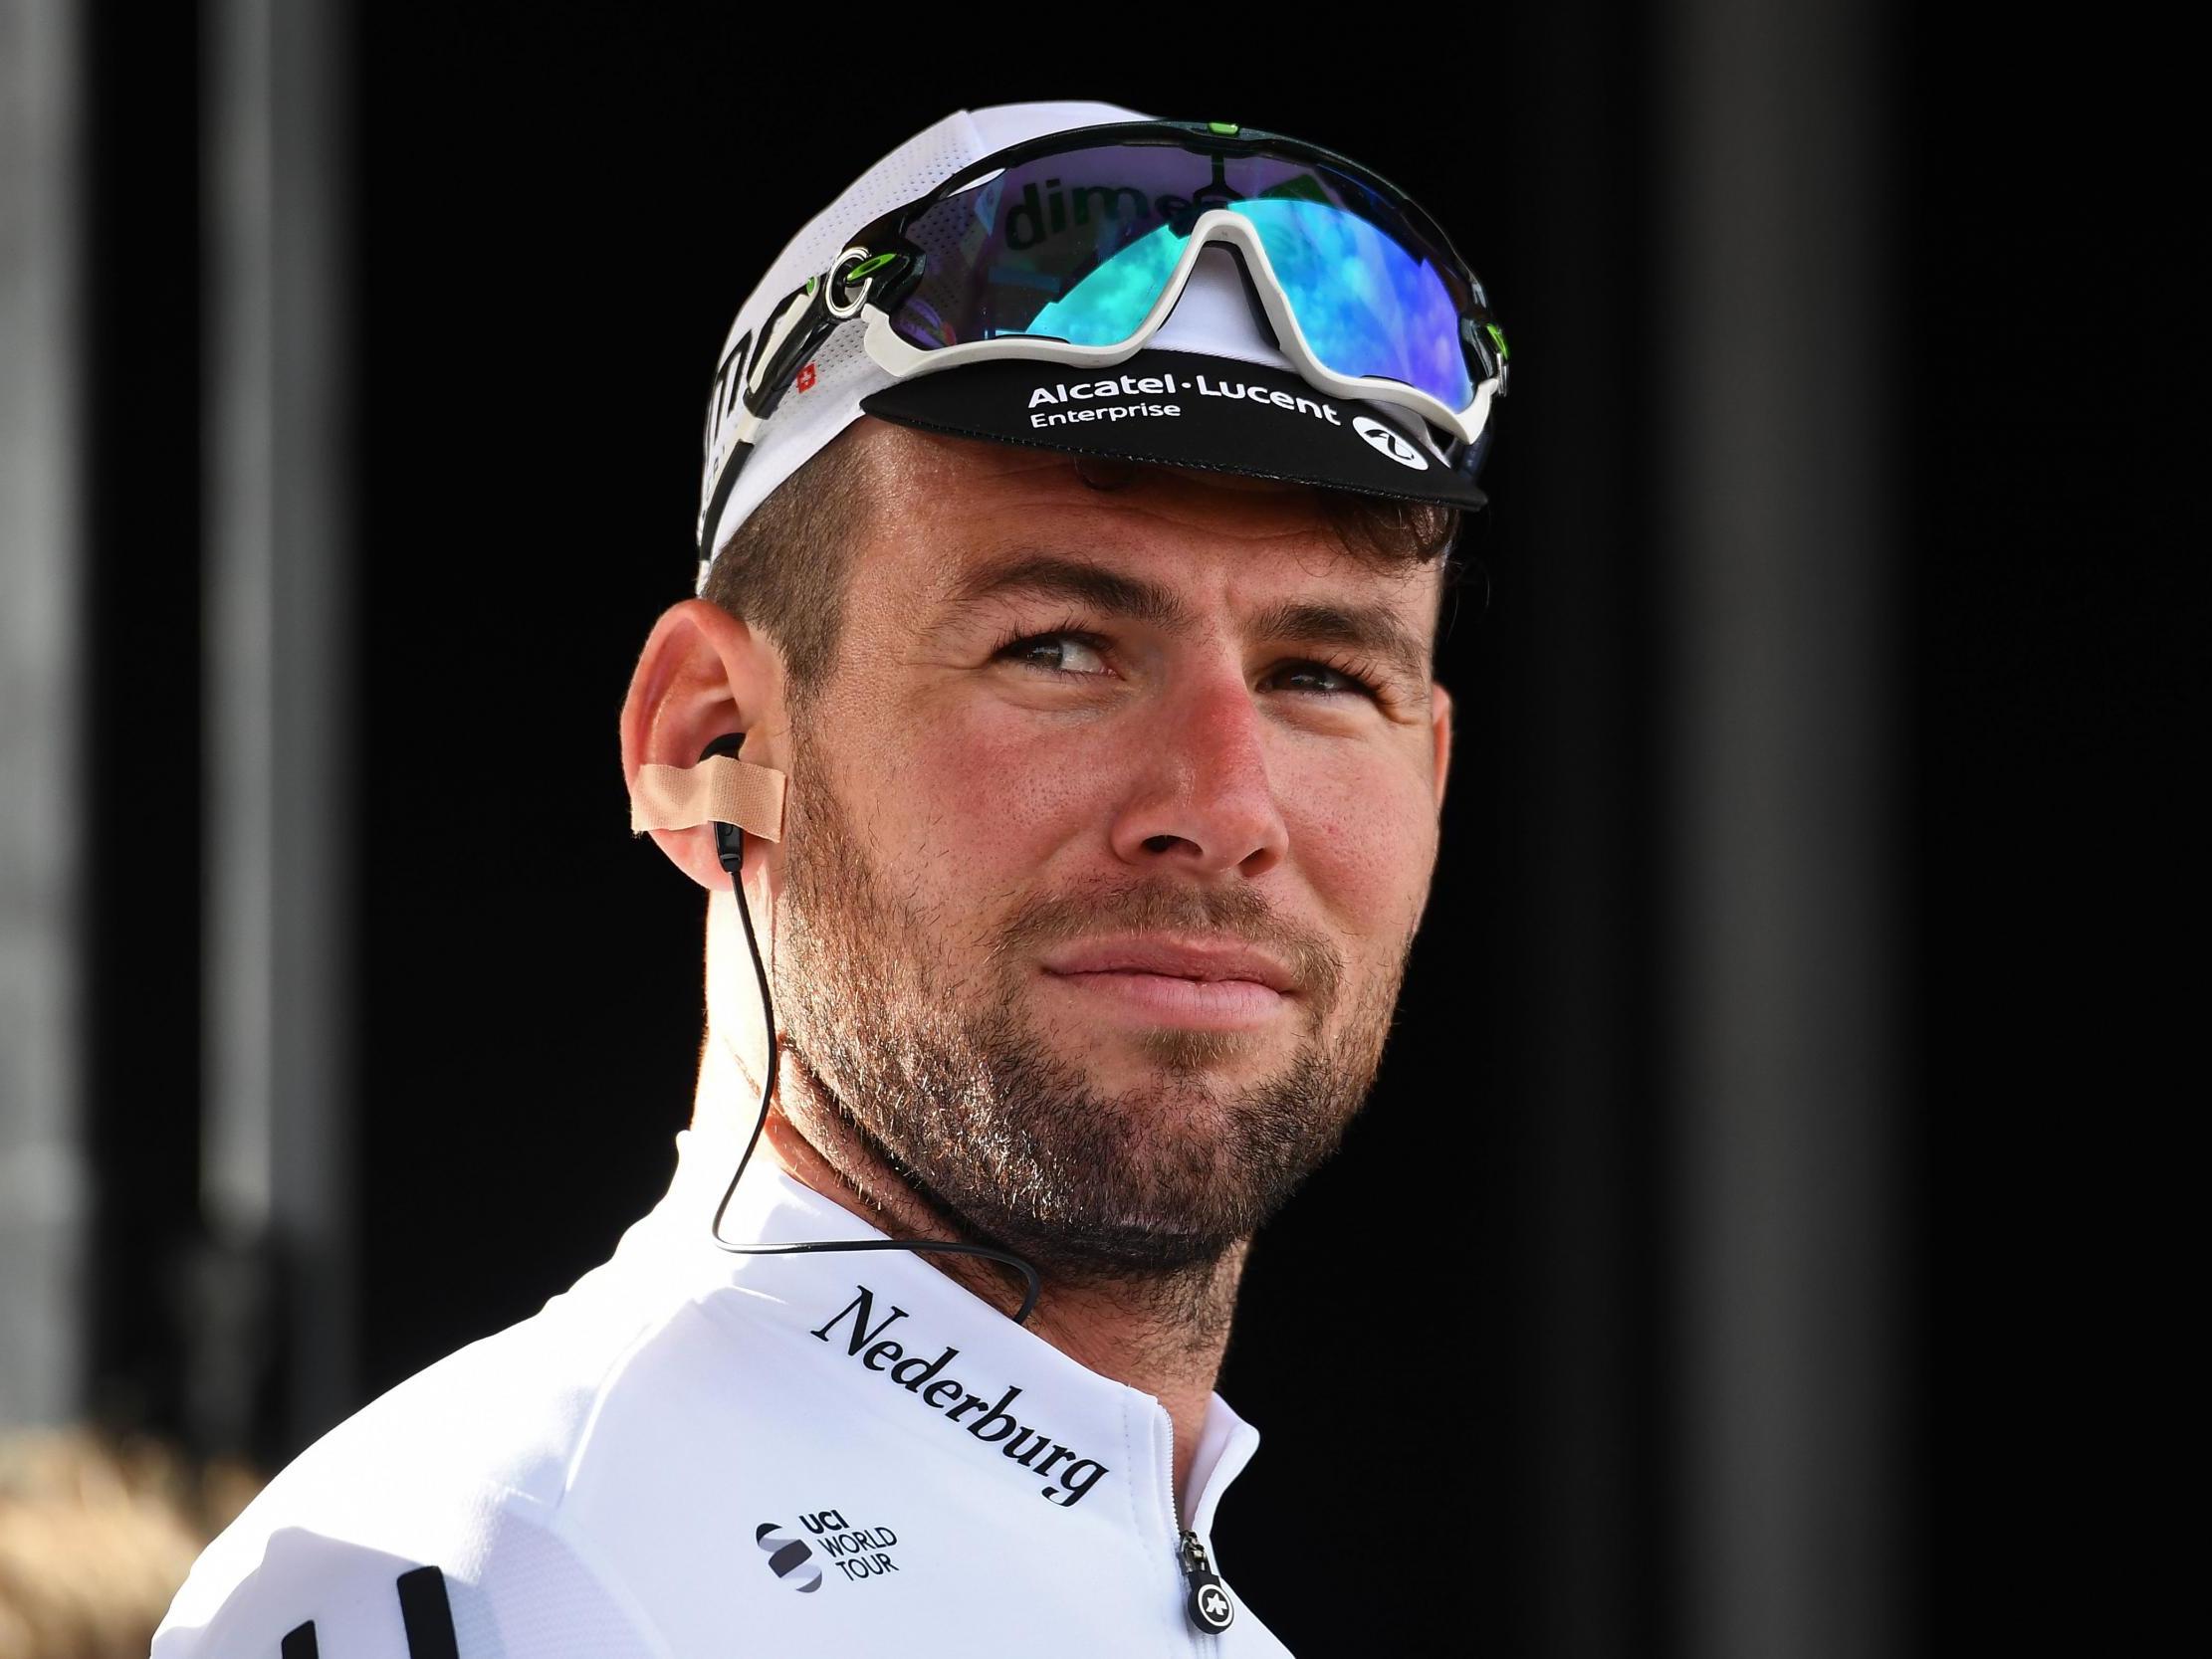 Mark Cavendish 'jumped' at chance to join Bahrain Merida after Team Dimension Data fallout